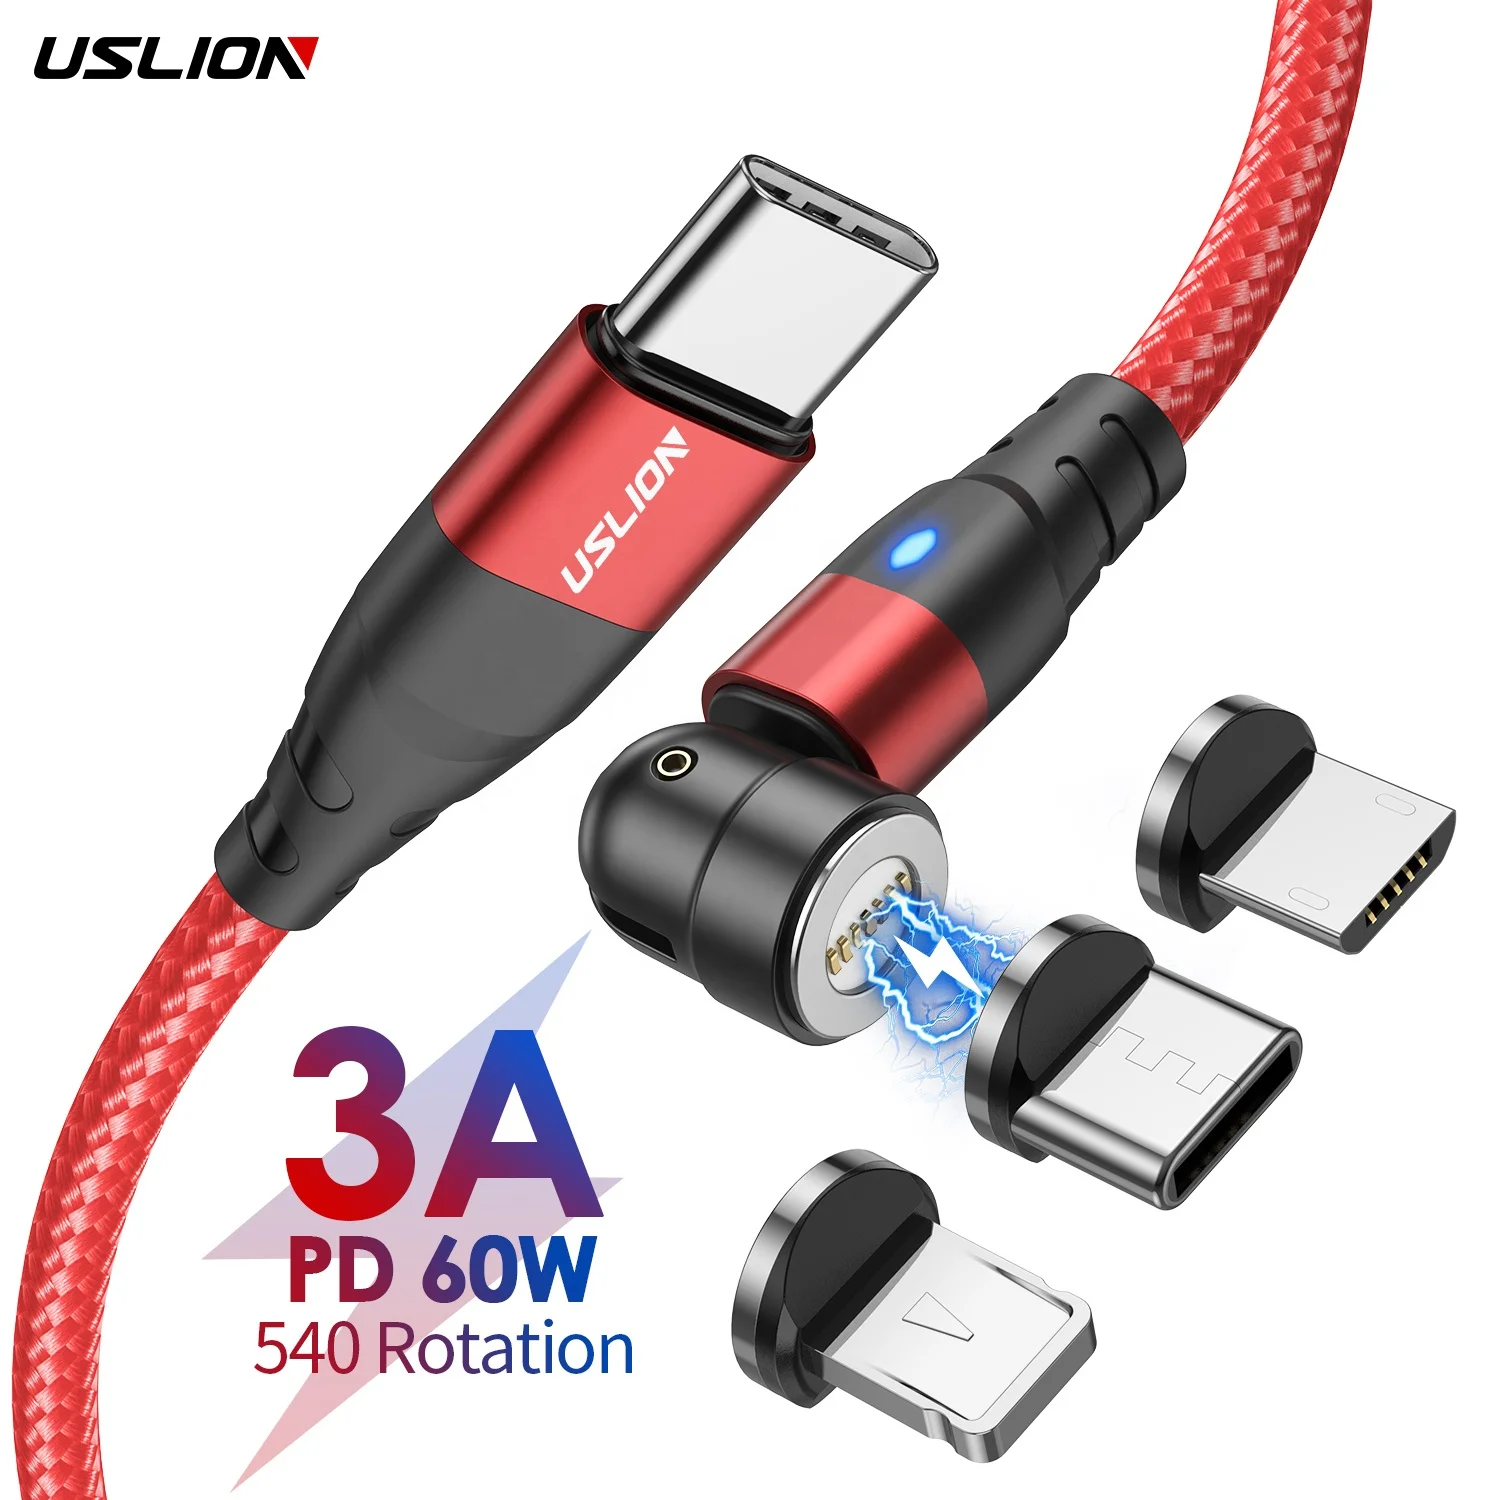 

USLION 60W PD USB C To Type C 540 Magnetic Cable Charger Charging Cable Magnet Data Cables For iPhone Charging Wire For Macbook, "black red purple"